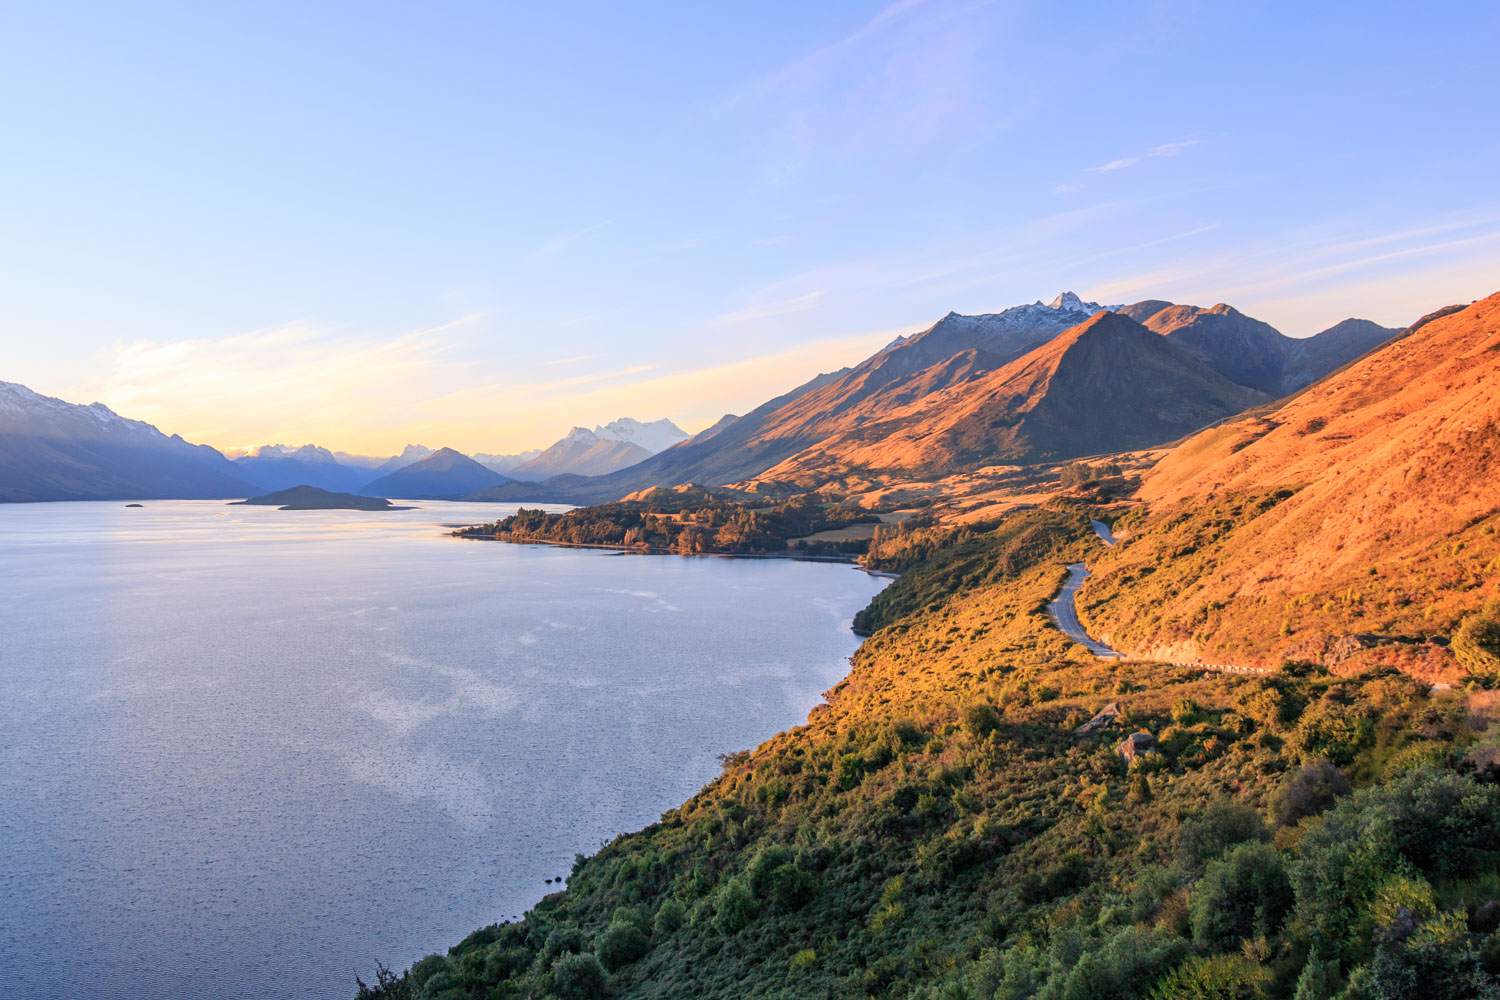 Road to Glenorchy is stunning.